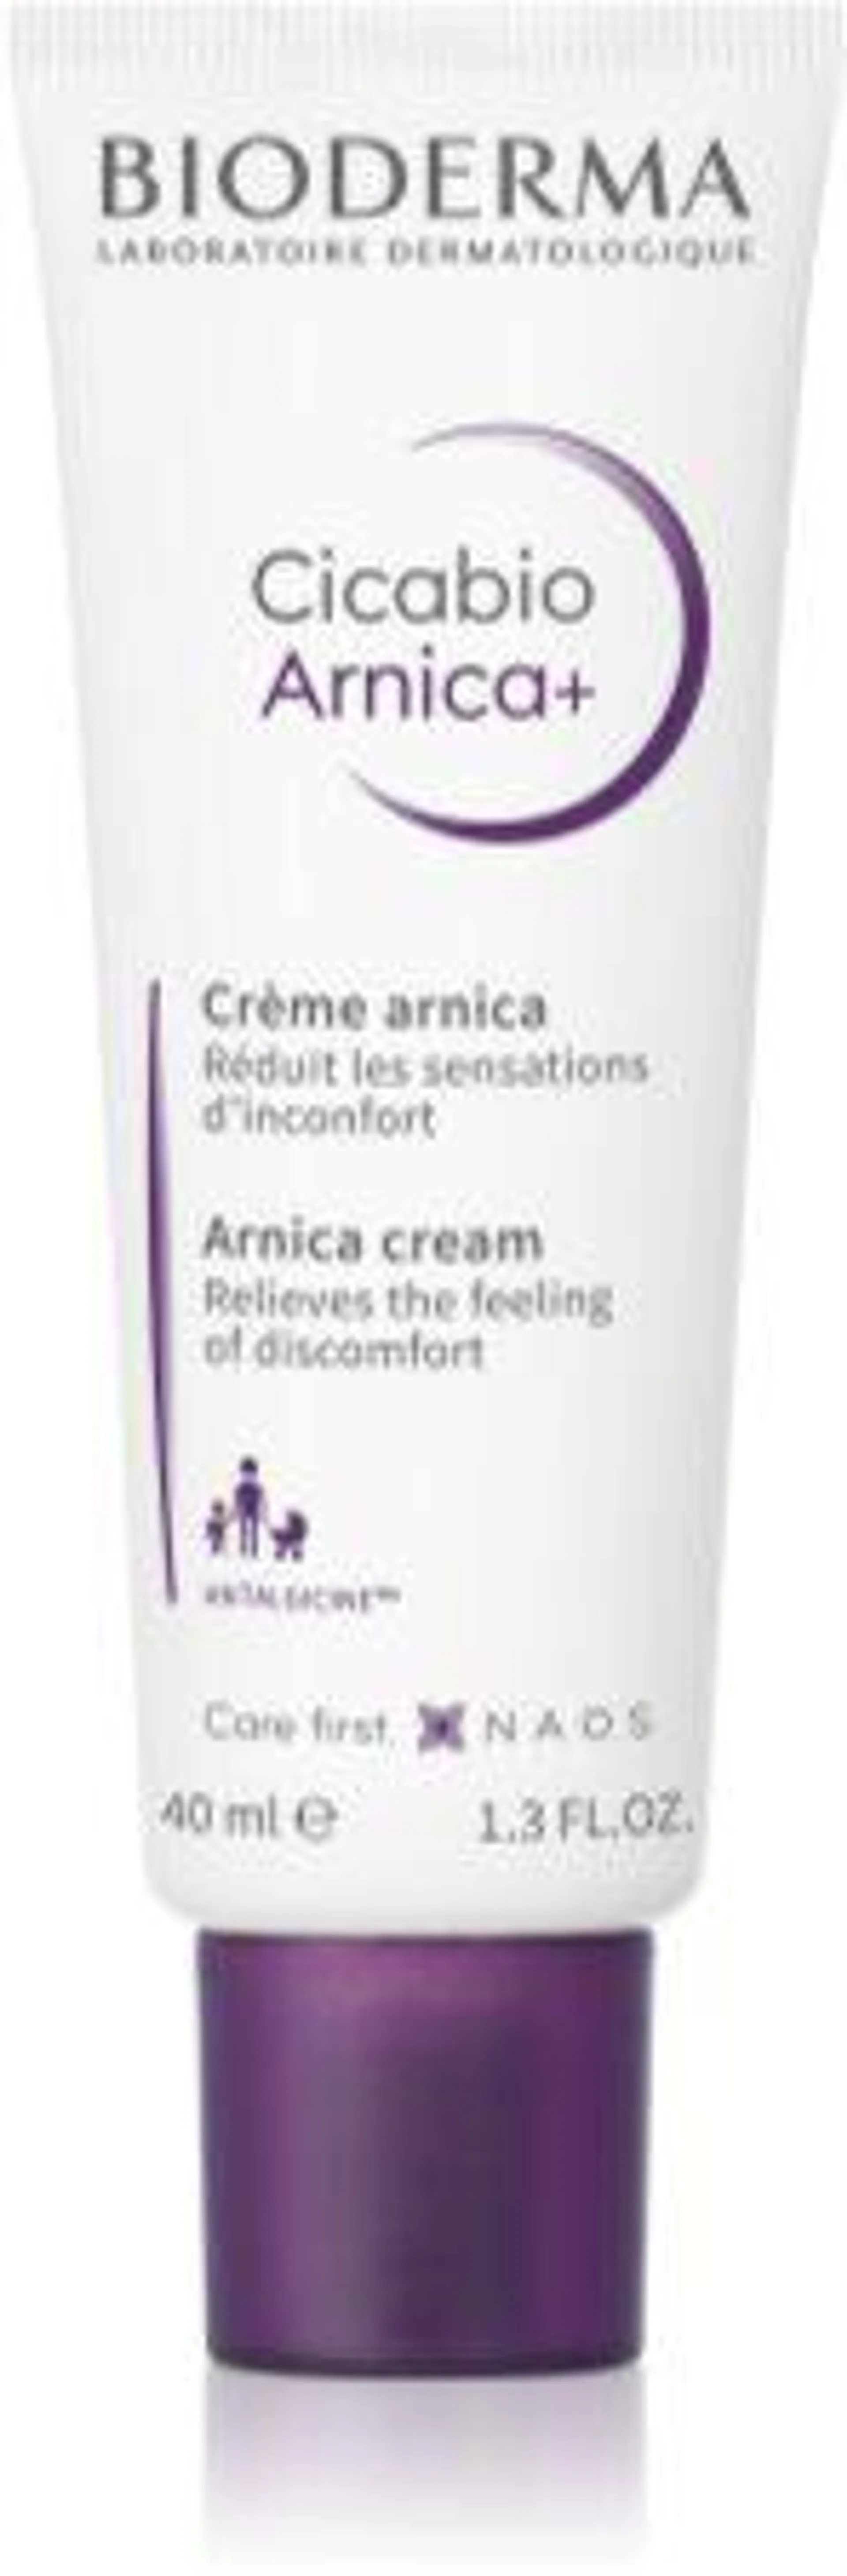 Bioderma Cicabio Arnica+ Product For Local Treatment to treat irritation and itching